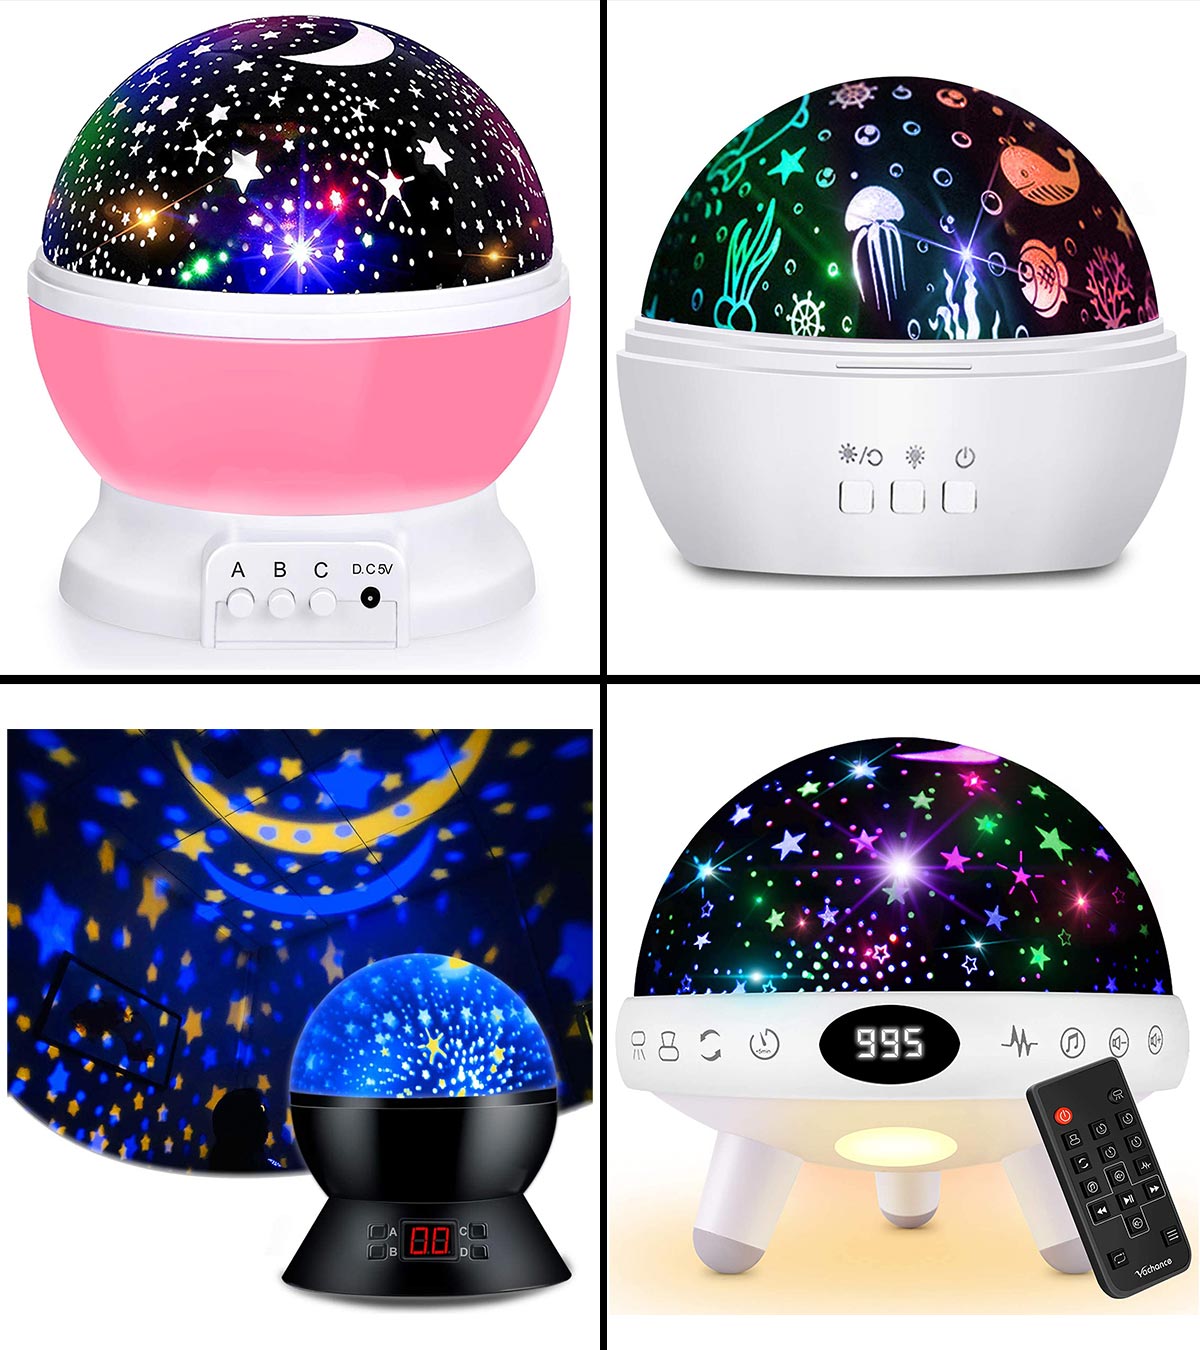 Blue 8 Colour Combinations with Timer Auto-Shut Off Newest Generation MJDUO 360 Degre Rotating Remote Control Rechargeable Kids Night Light Star Projector Best Gift for Teens Baby Friend 